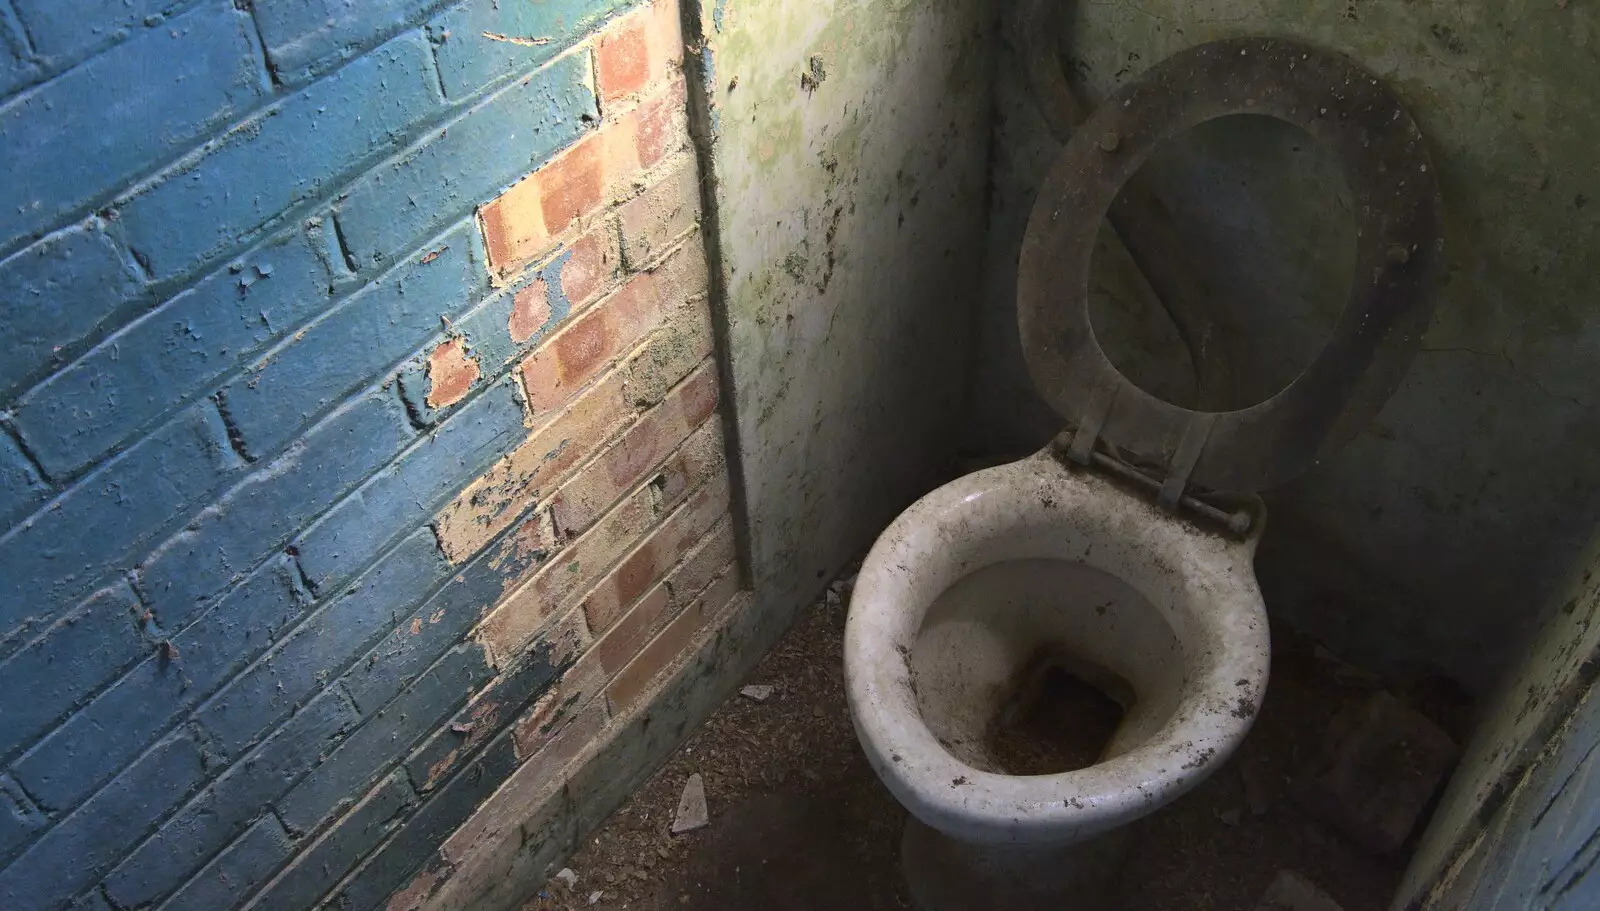 Looking down a dried-out toilet bowl, from A 1940s Timewarp, Site 4, Bungay Airfield, Flixton, Suffolk - 9th June 2022